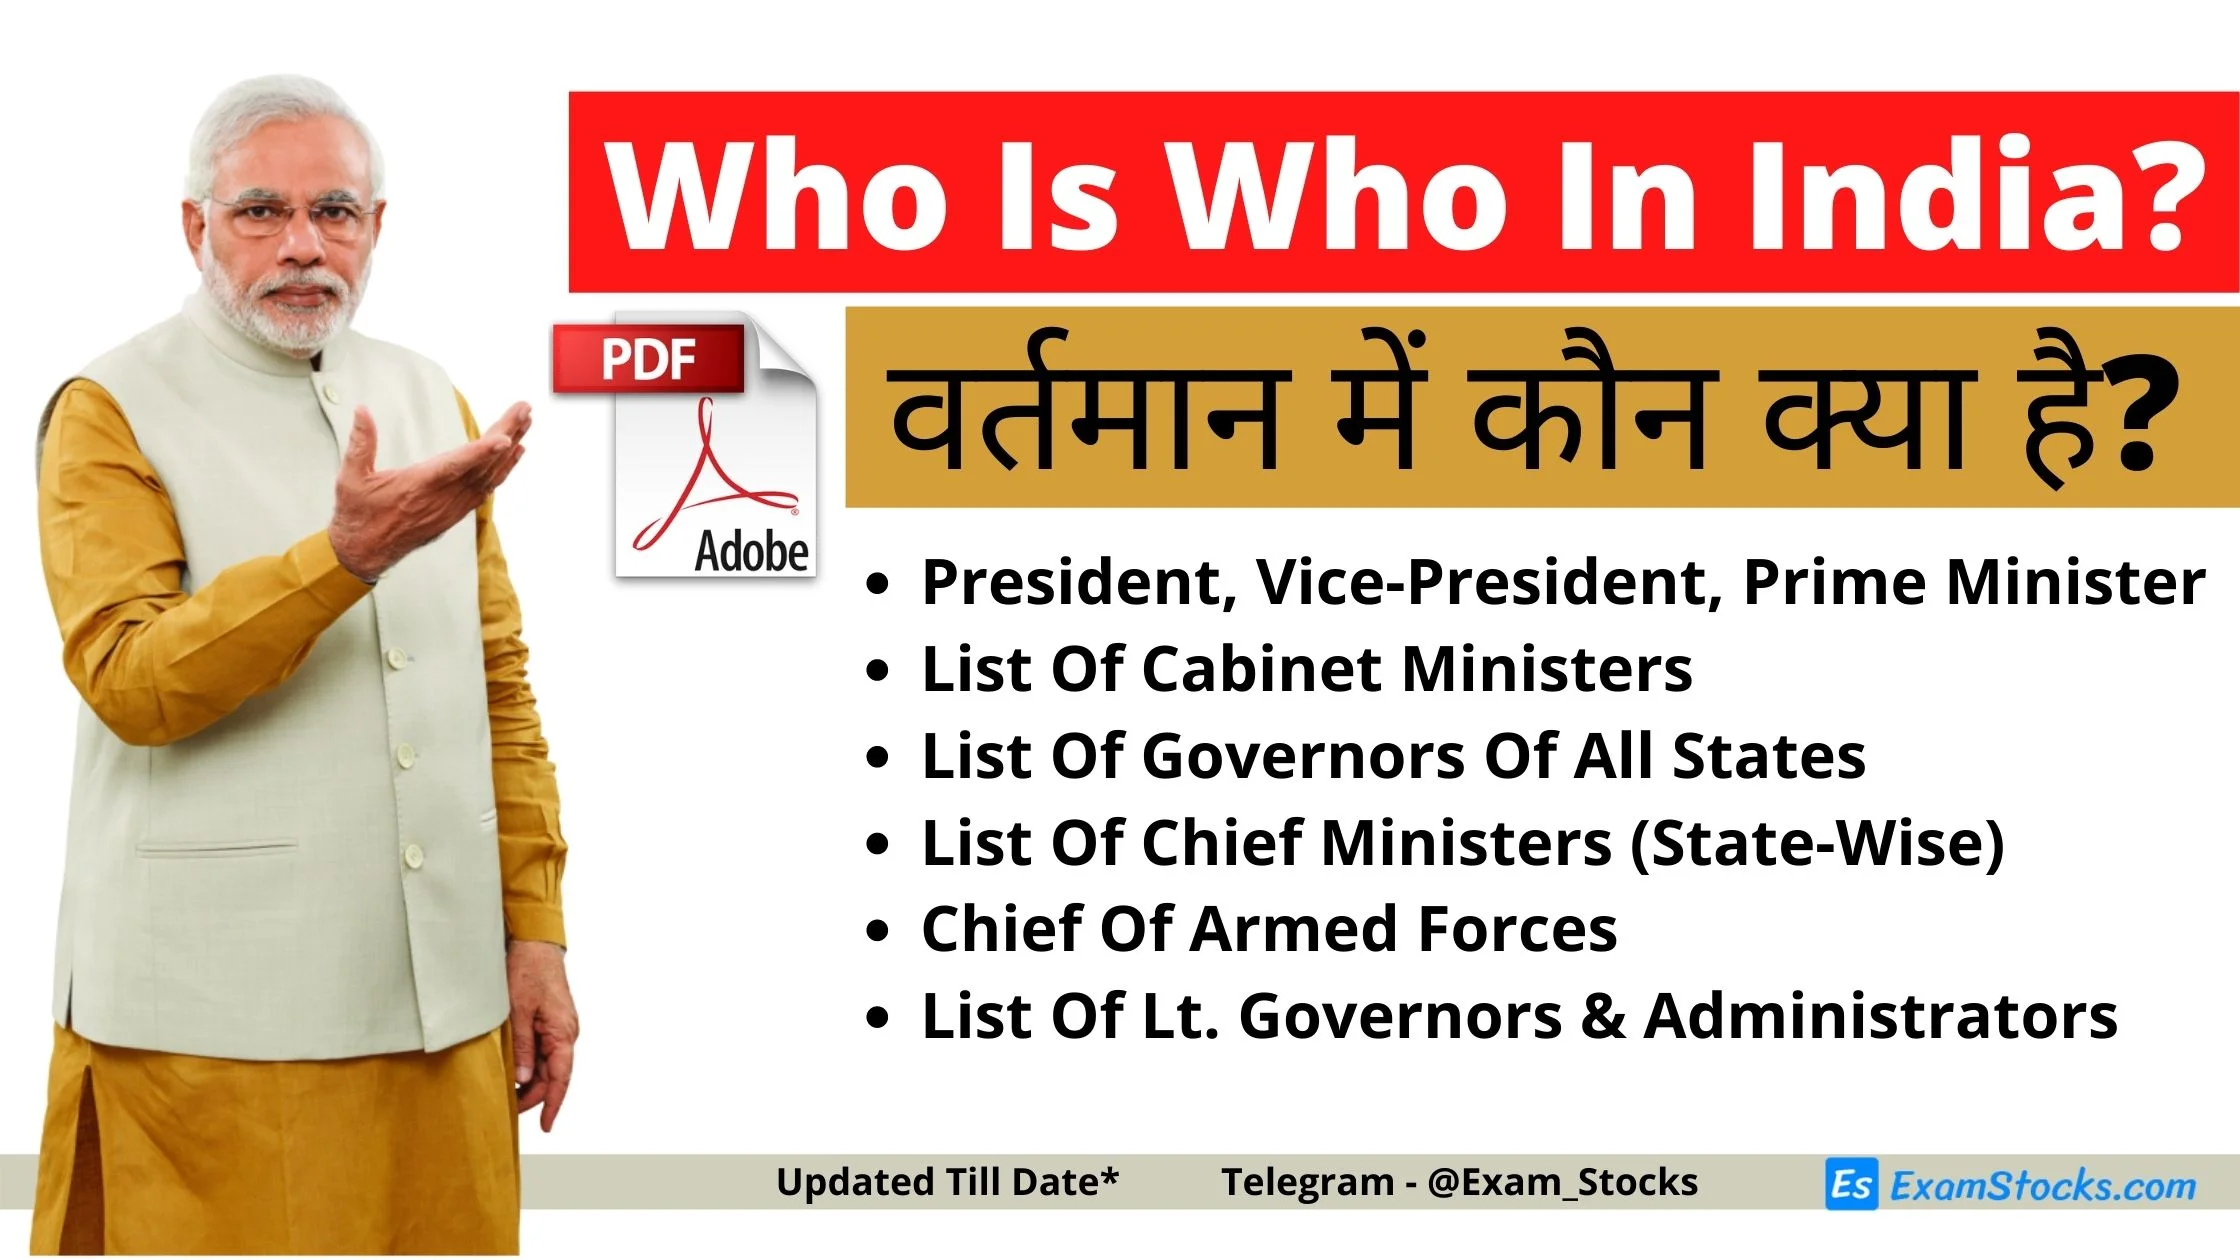 Who Is Who In India PDF